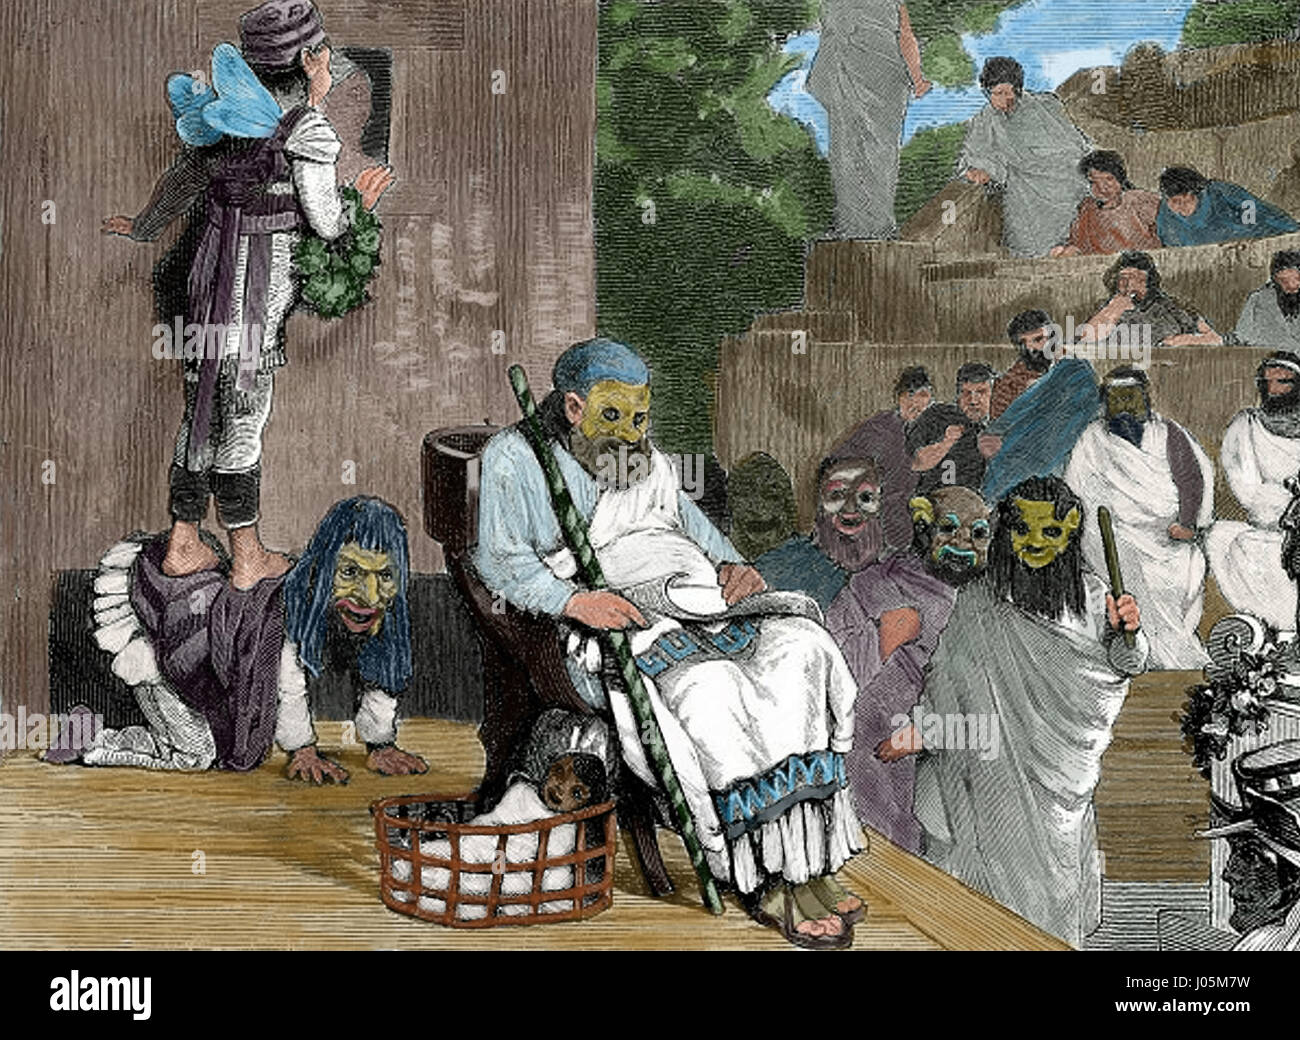 Performance in ancient Greek Theatre. Performance in ancient Greek Theatre. Illustration, 19th century. Greece and Rome, Jakob Falke, 1879.  Color. Stock Photo